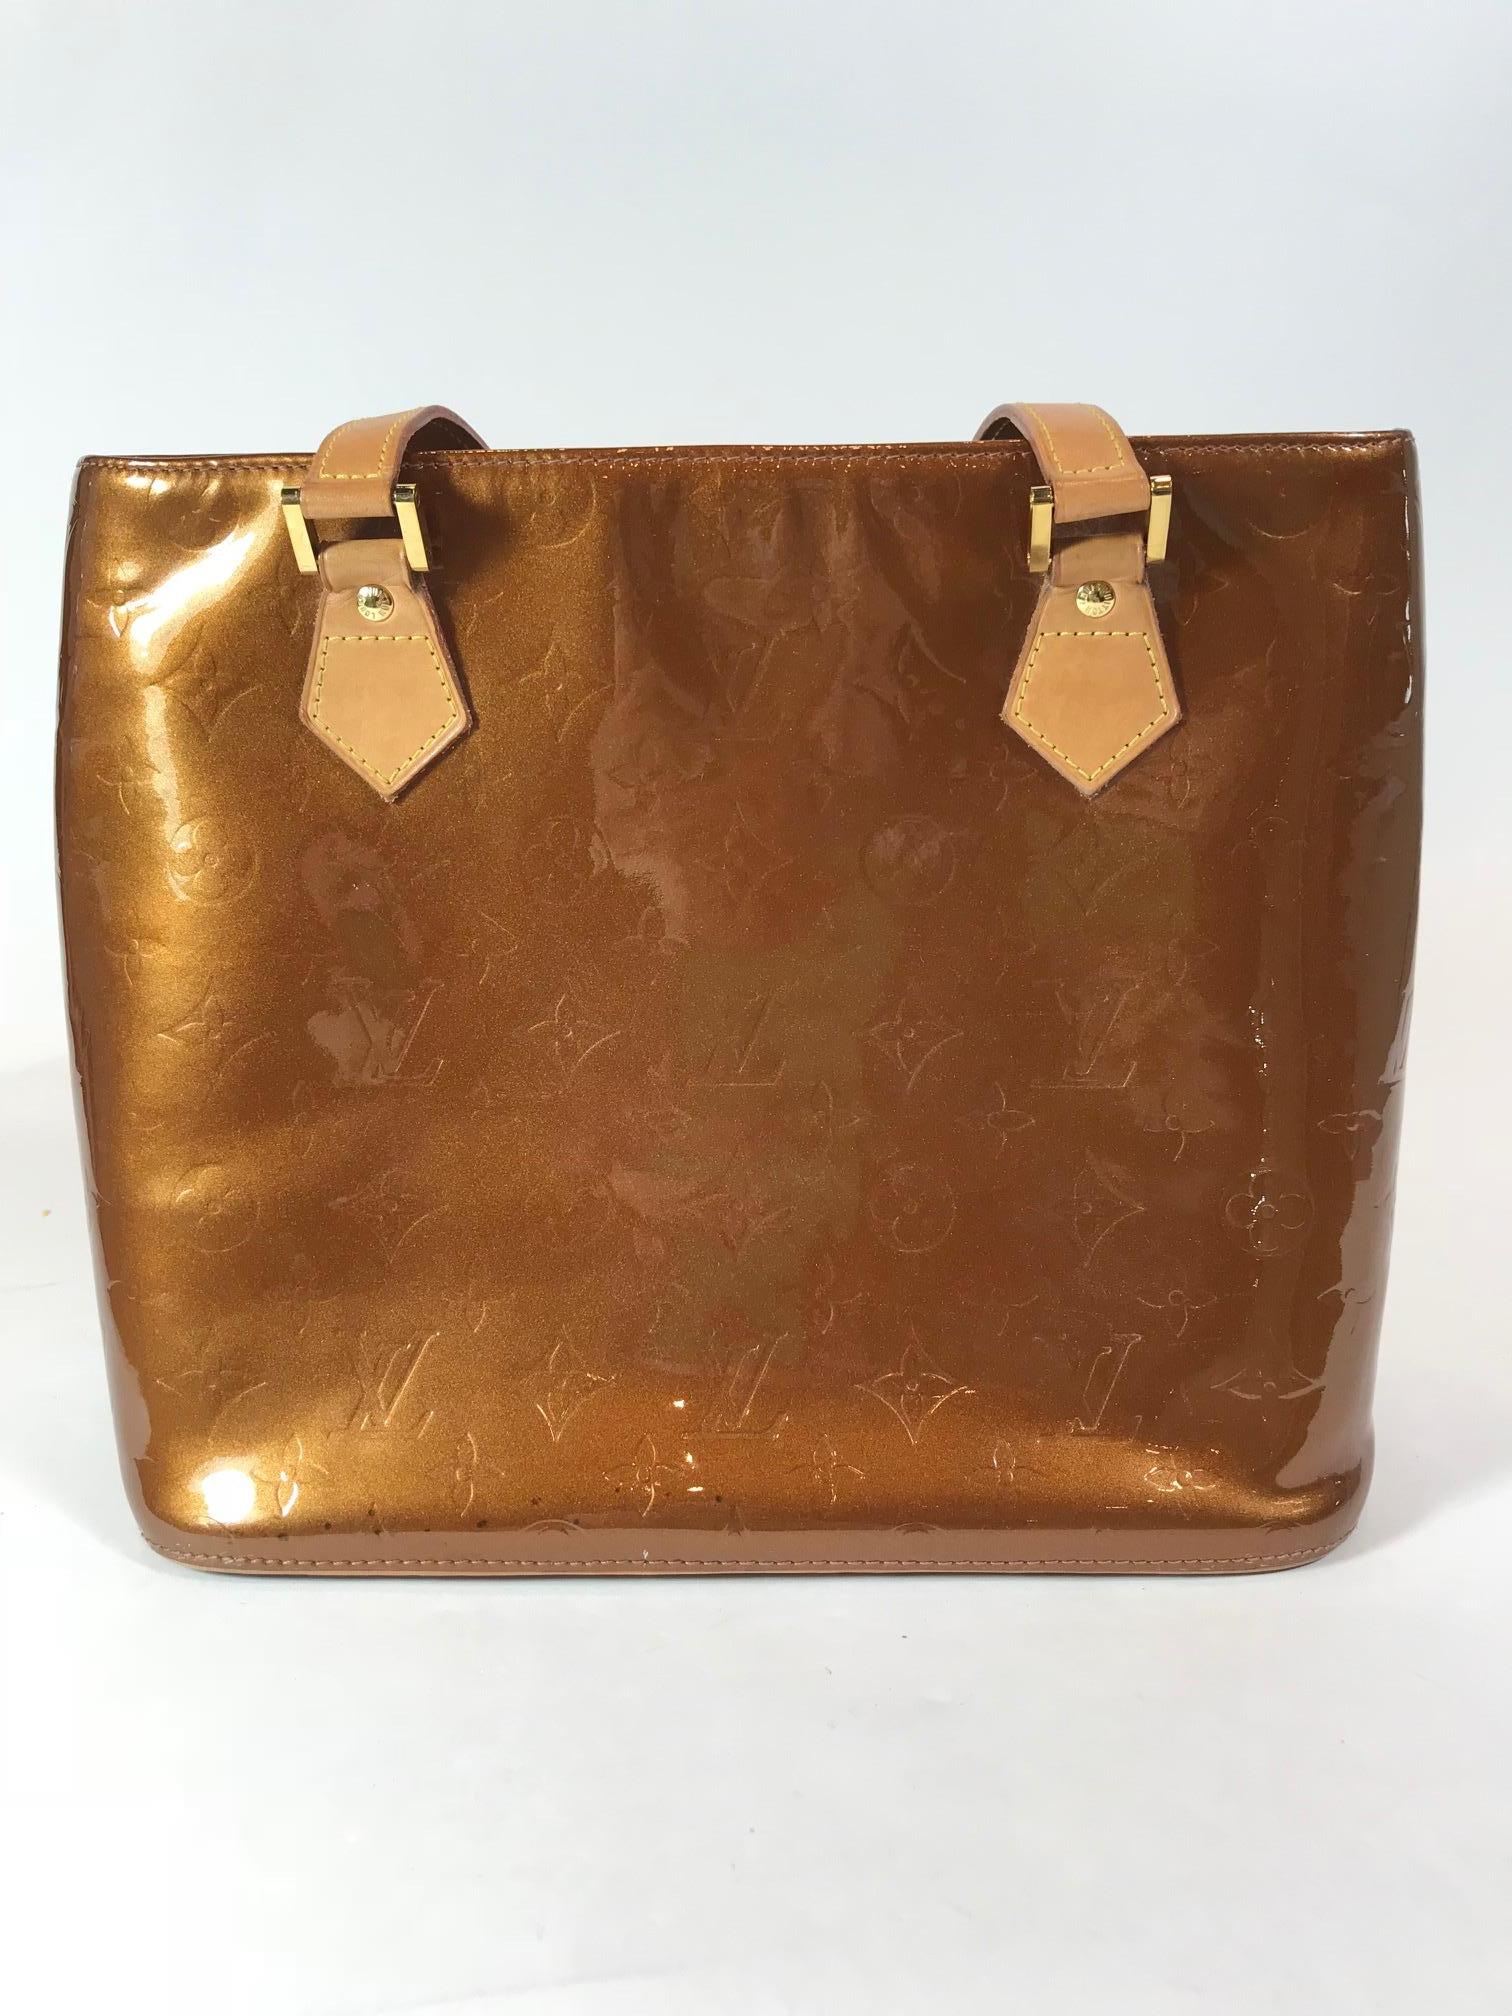 Louis Vuitton Brown Vernis Houston Tote In Excellent Condition For Sale In Roslyn, NY